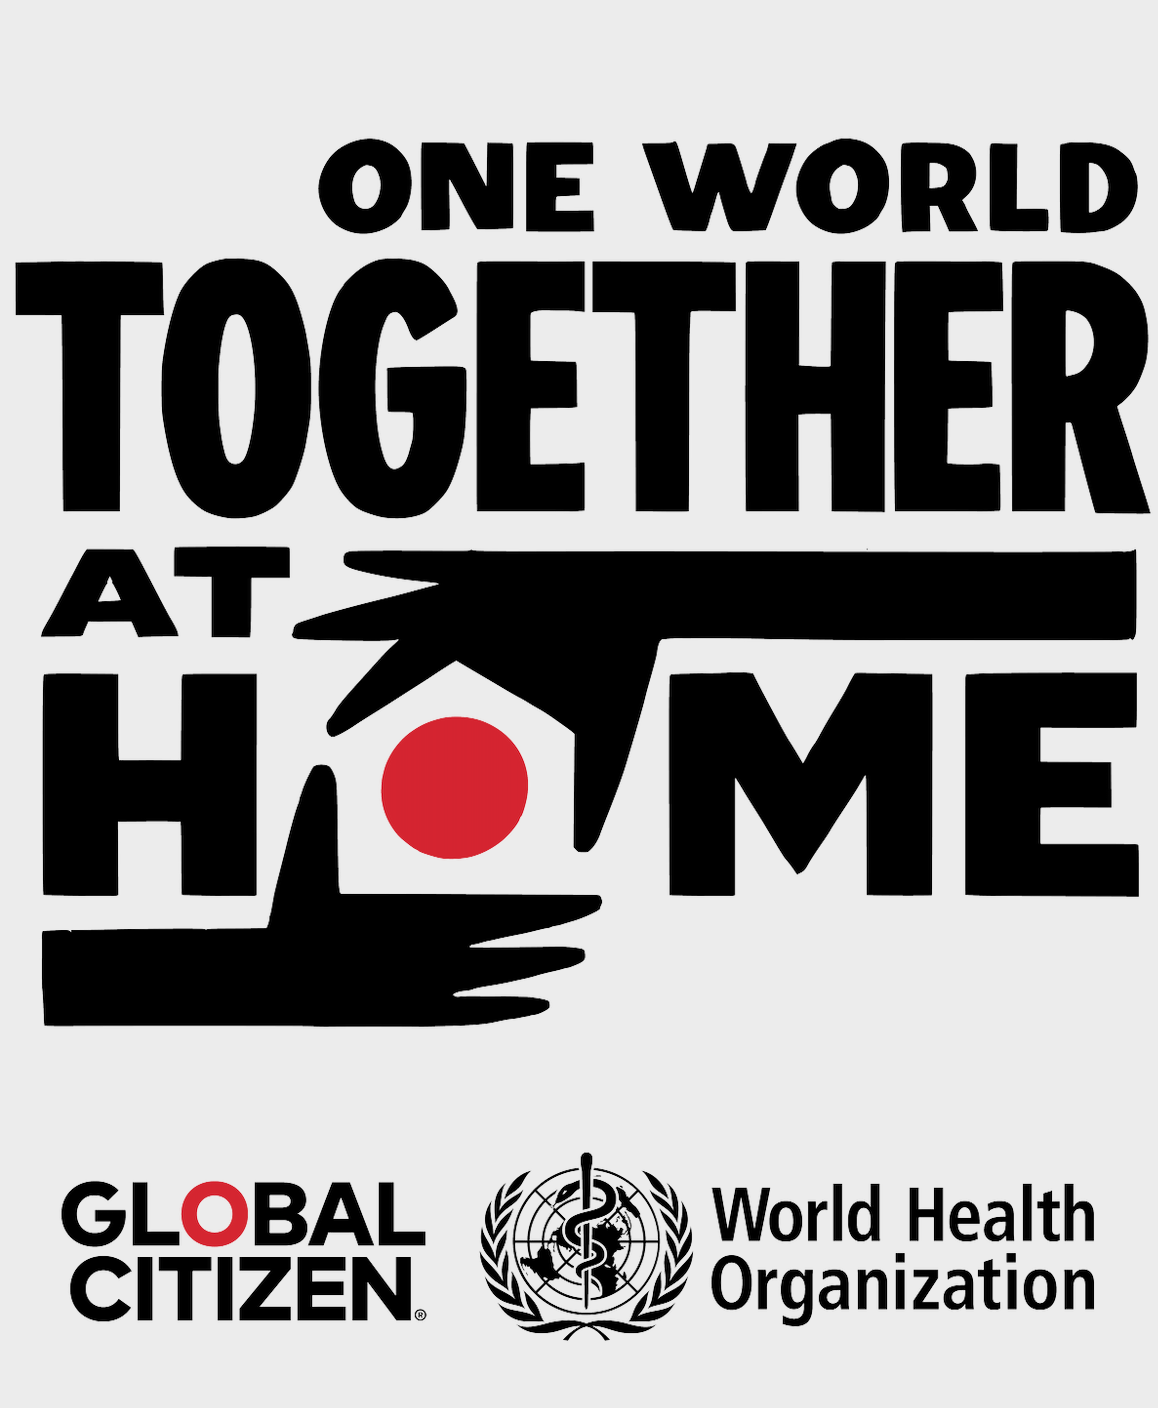 ‘One World: Together At Home’ Global Special To Air Live On National Geographic And National Geographic Abu Dhabi On 19 April 2020, At 4 AM UAE/3 AM KSA Time